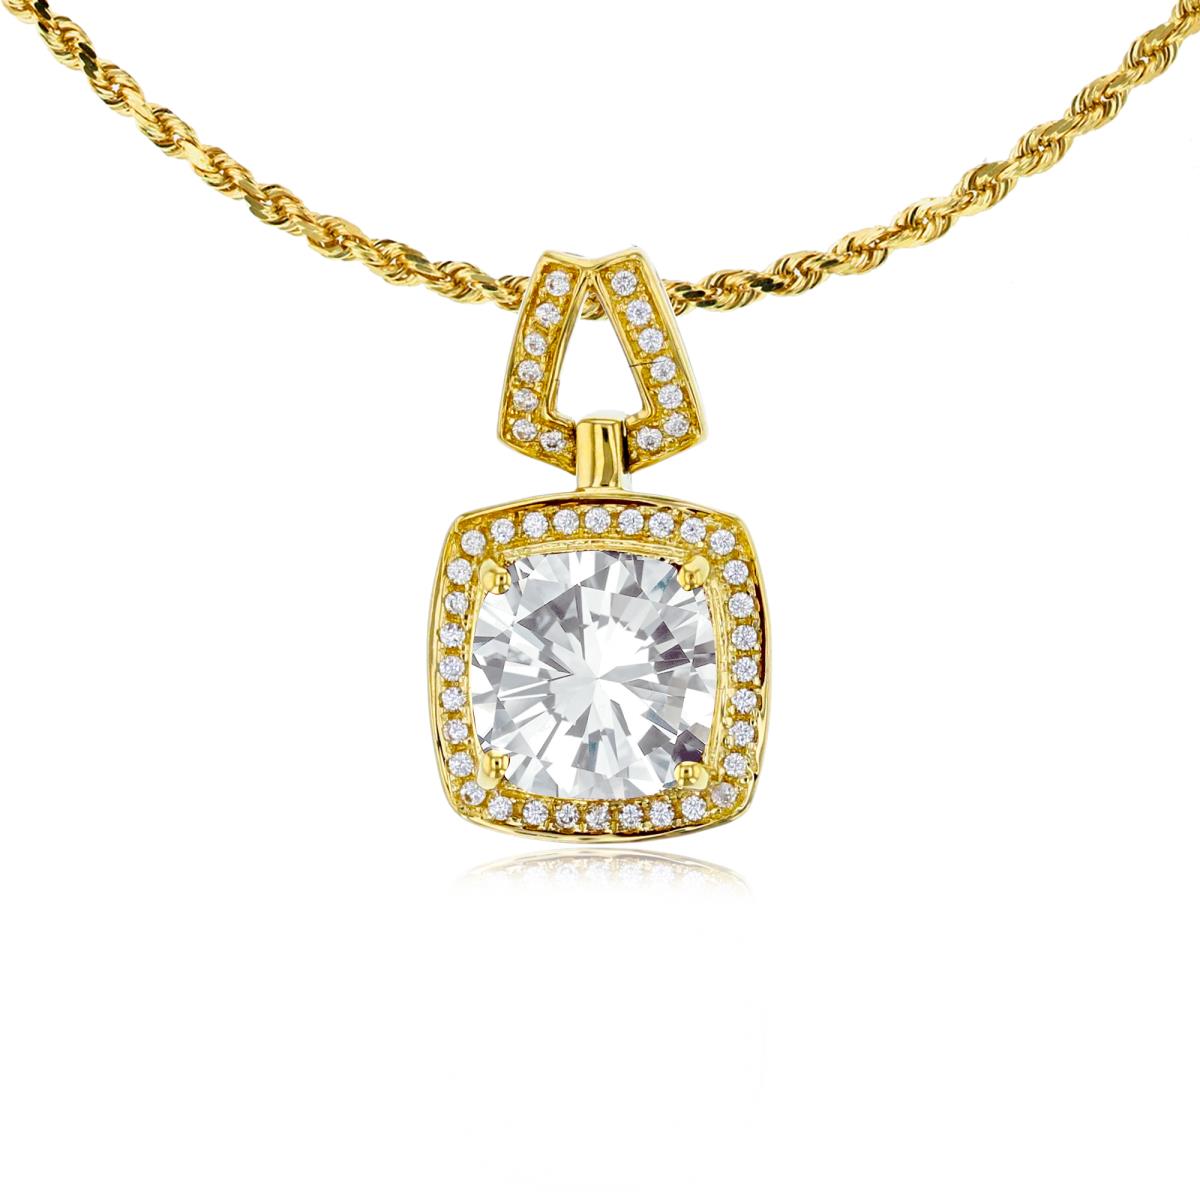 10K Yellow Gold 7mm Cushion White Topaz & 0.10 CTTW Diamond Halo 18" Rope Chain Necklace